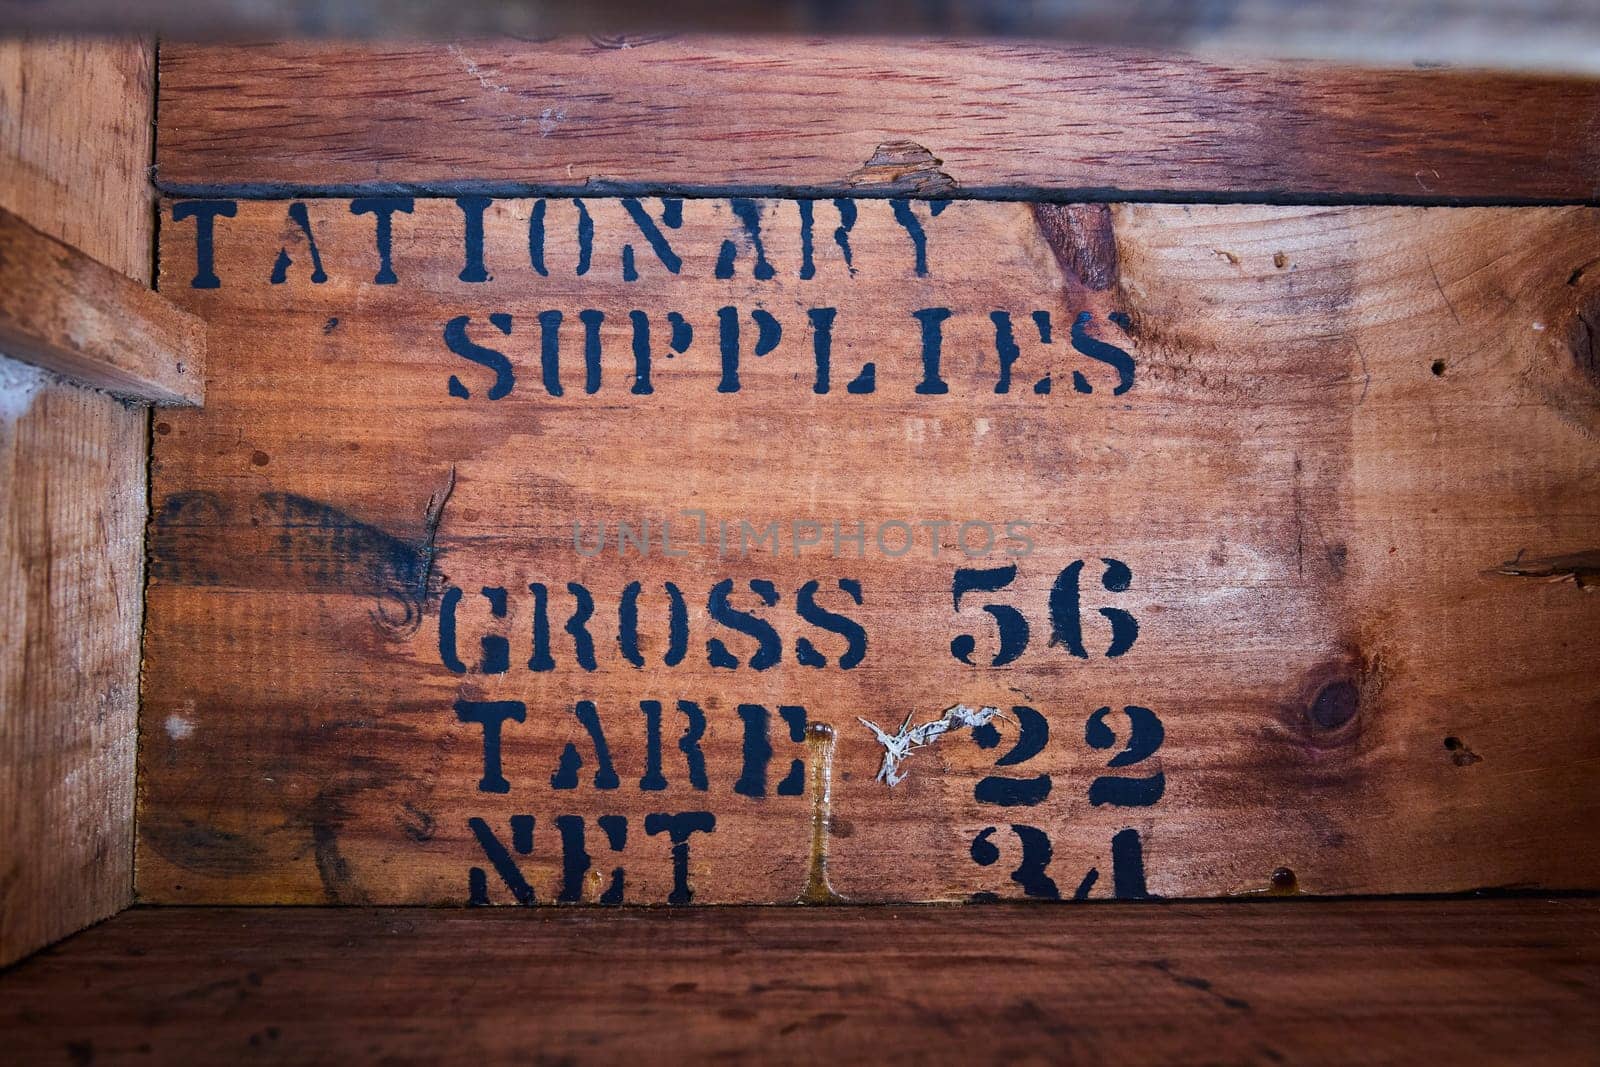 Vintage wooden crate from Hicksville, Ohio, with 'STATIONERY SUPPLIES' text, showcasing antique charm and utility.